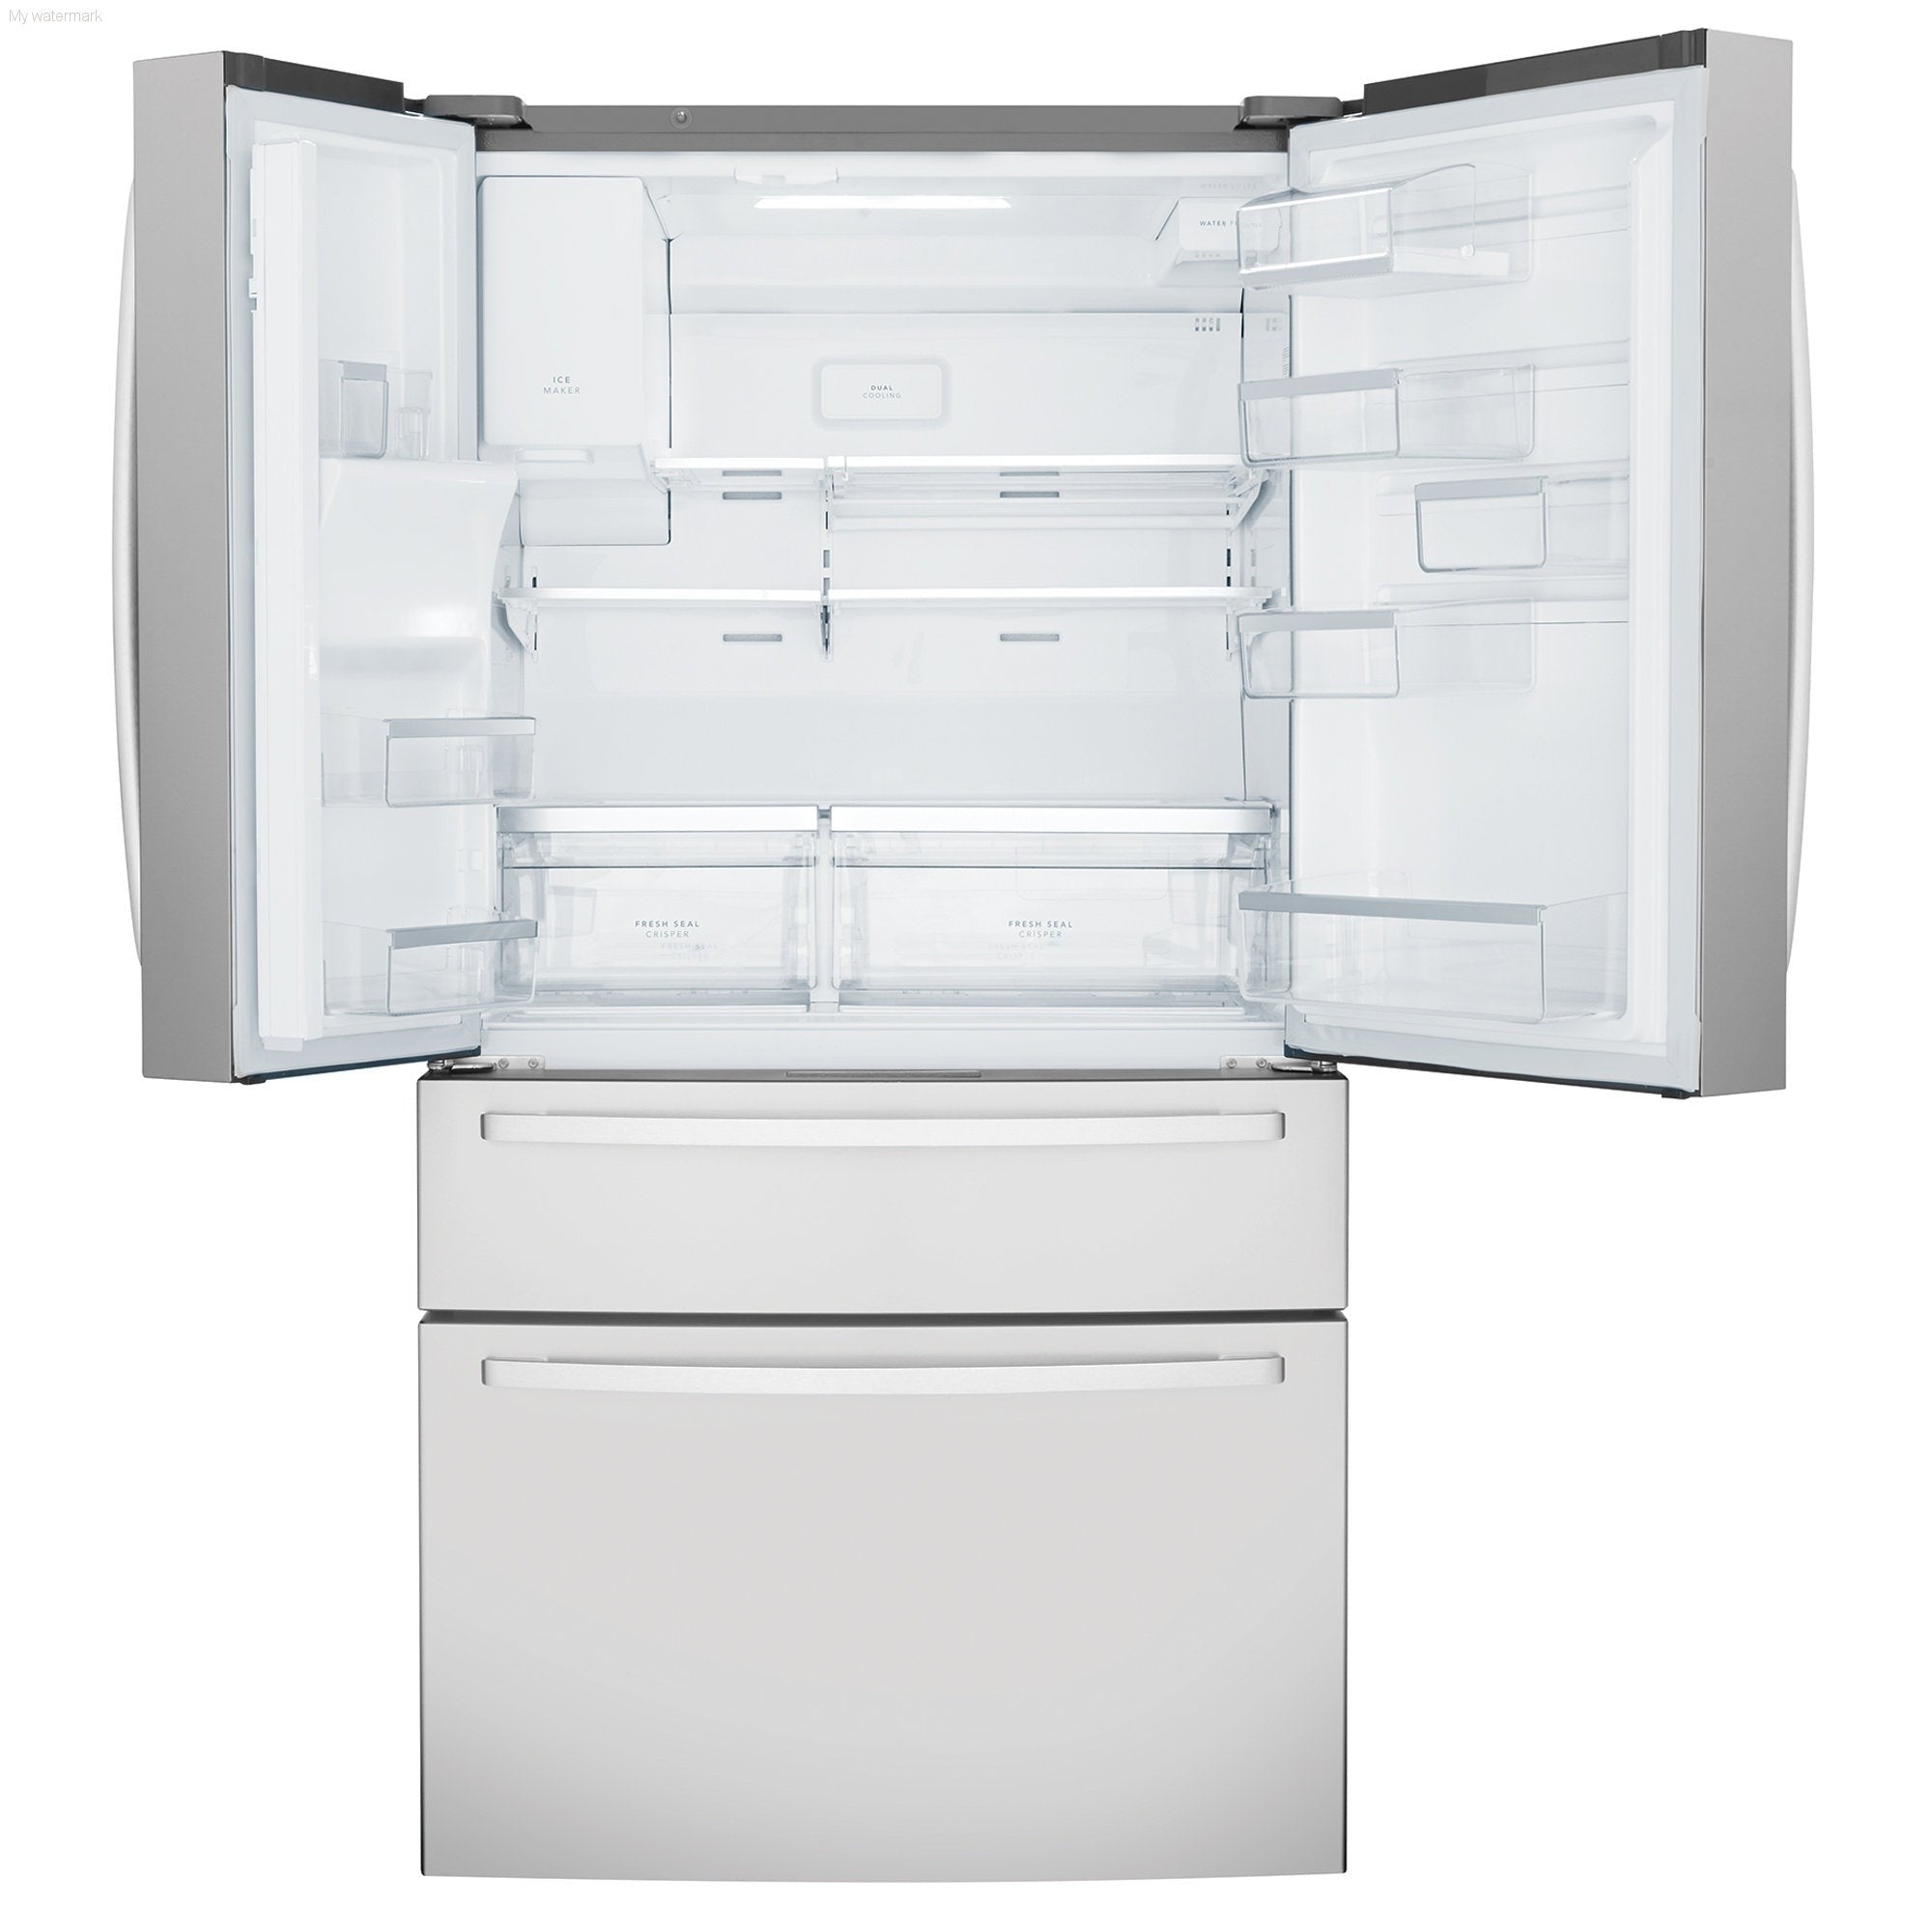 Westinghouse 619L French Door Fridge with Ice and Water